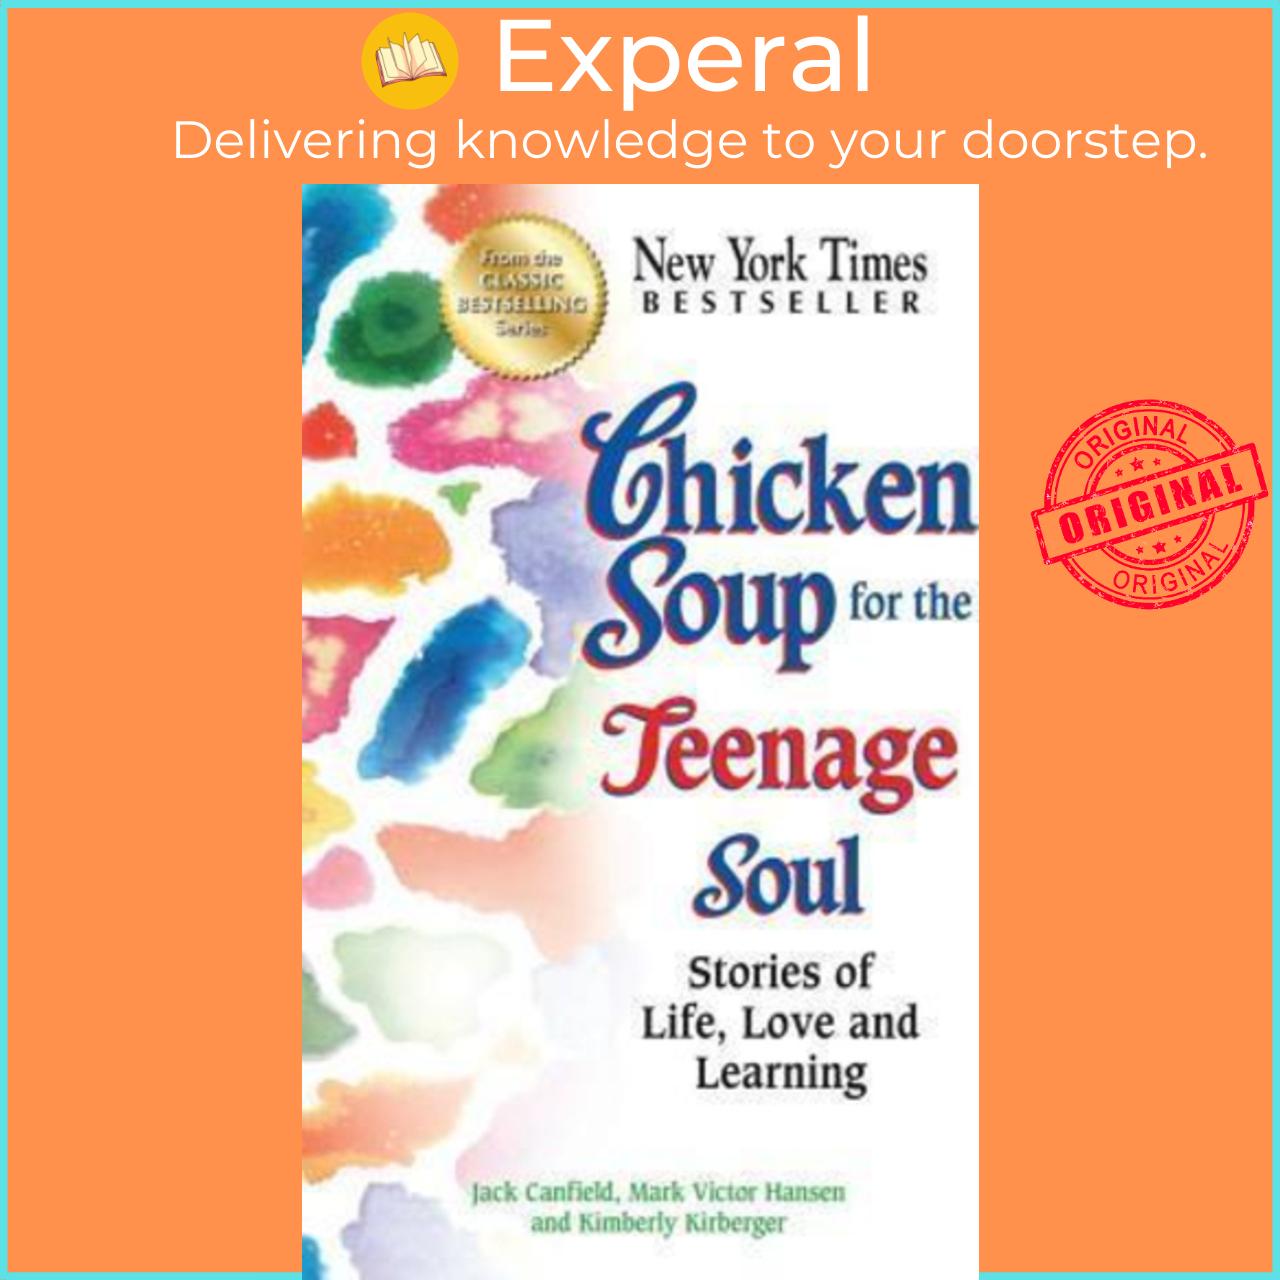 Sách - Chicken Soup for the Teenage Soul : Stories of Life, Love and Learning by Jack Canfield (US edition, paperback)